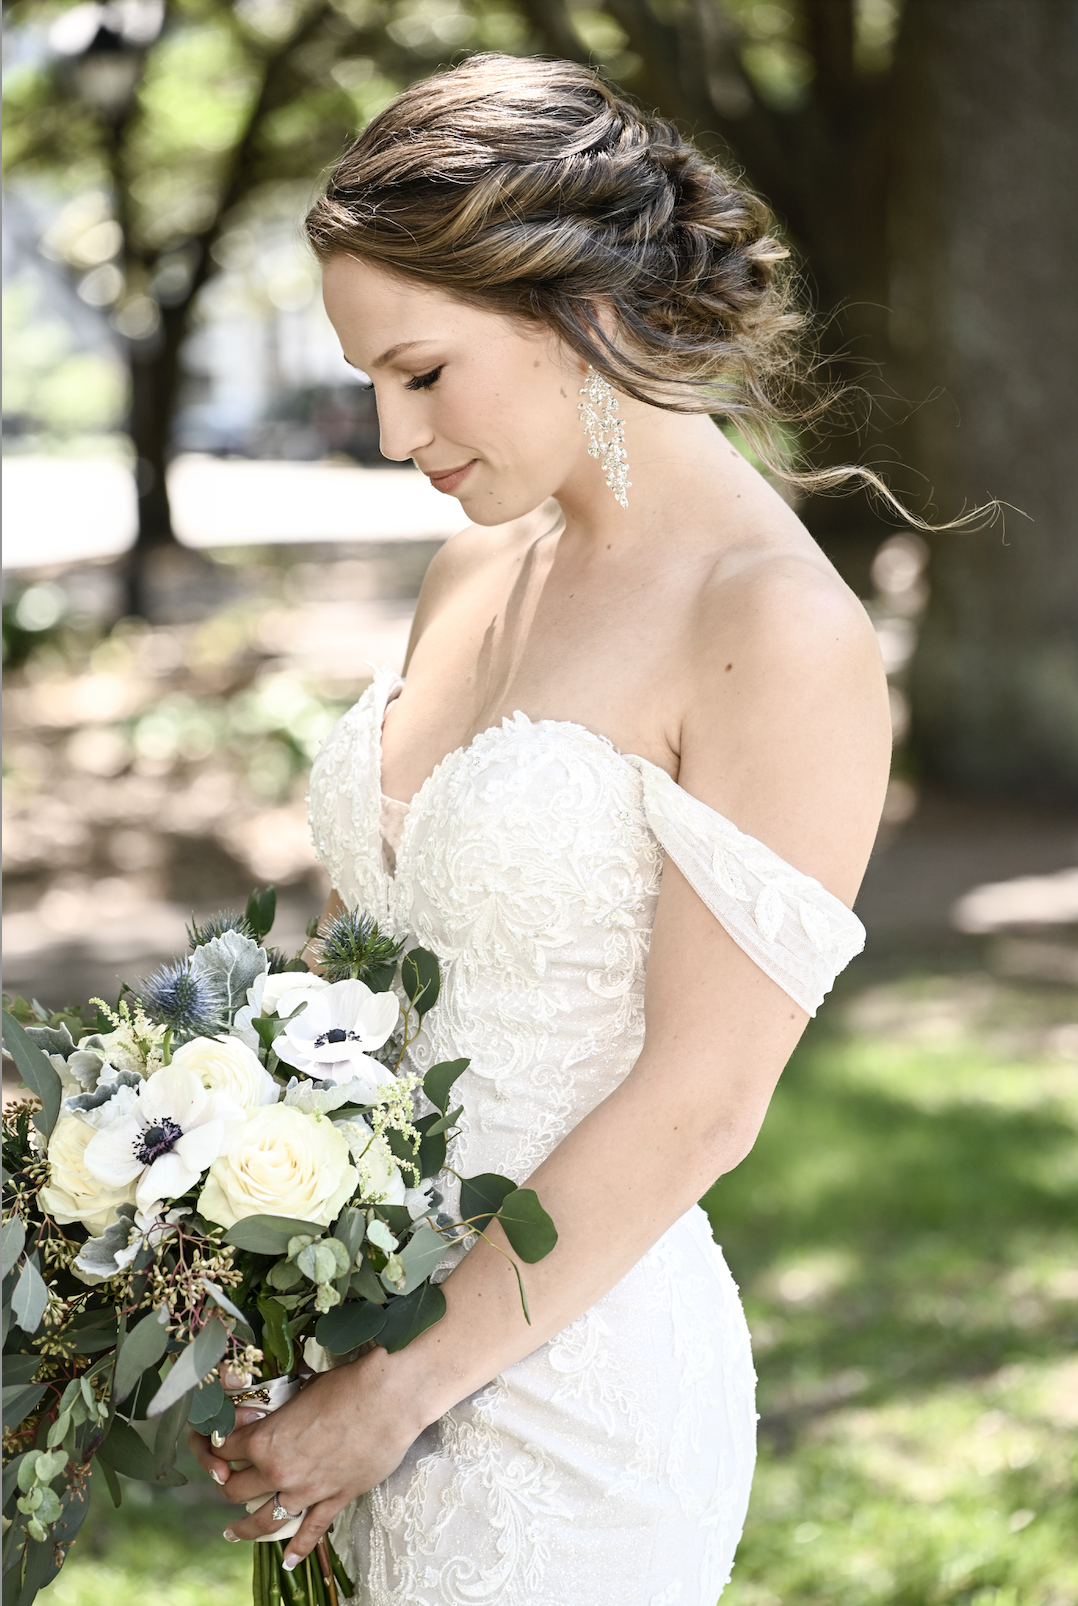 ivory-and-beau-bride-natalie-in-flattering-lace-fitted-mermaid-wedding-dress-named-frederique-by-maggie-sottero-purchased-from-savannah-bridal-shop-ivory-and-beau-6.png